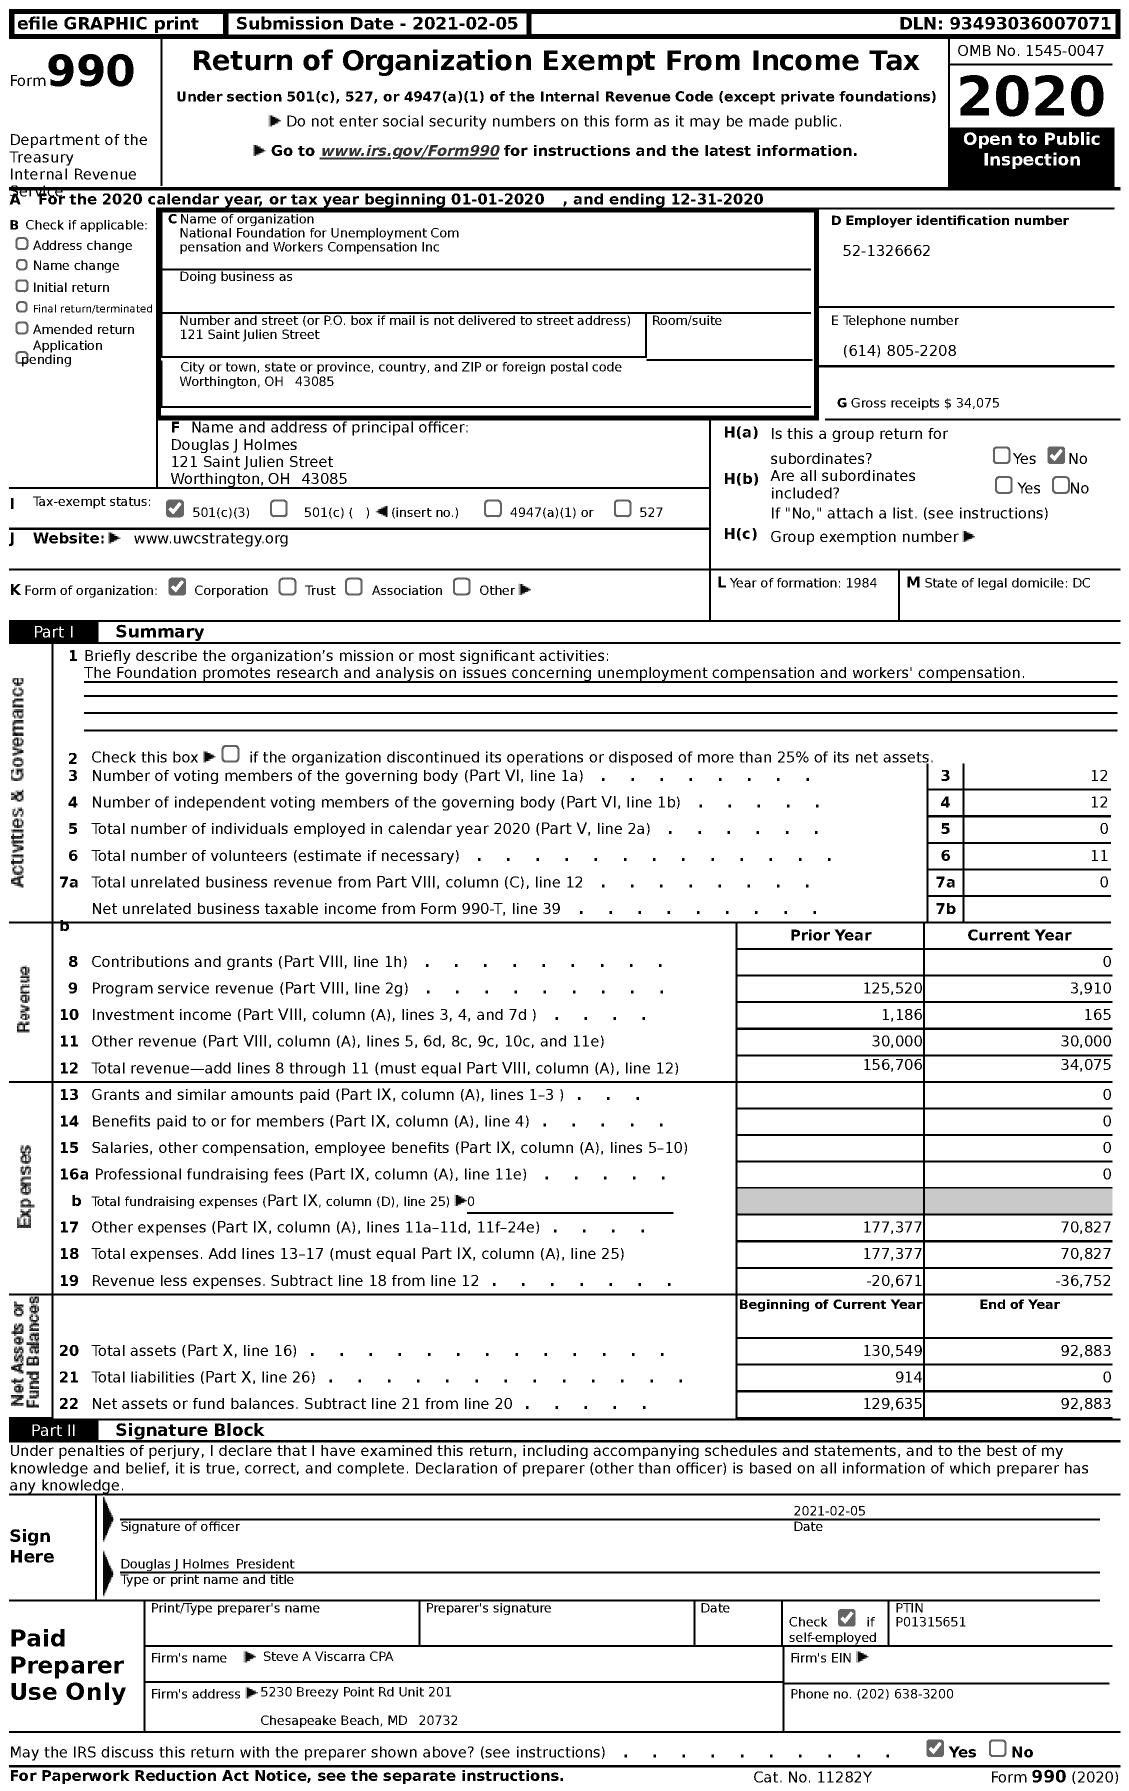 Image of first page of 2020 Form 990 for National Foundation for Unemployment Compensation pensation and Workers Compensation